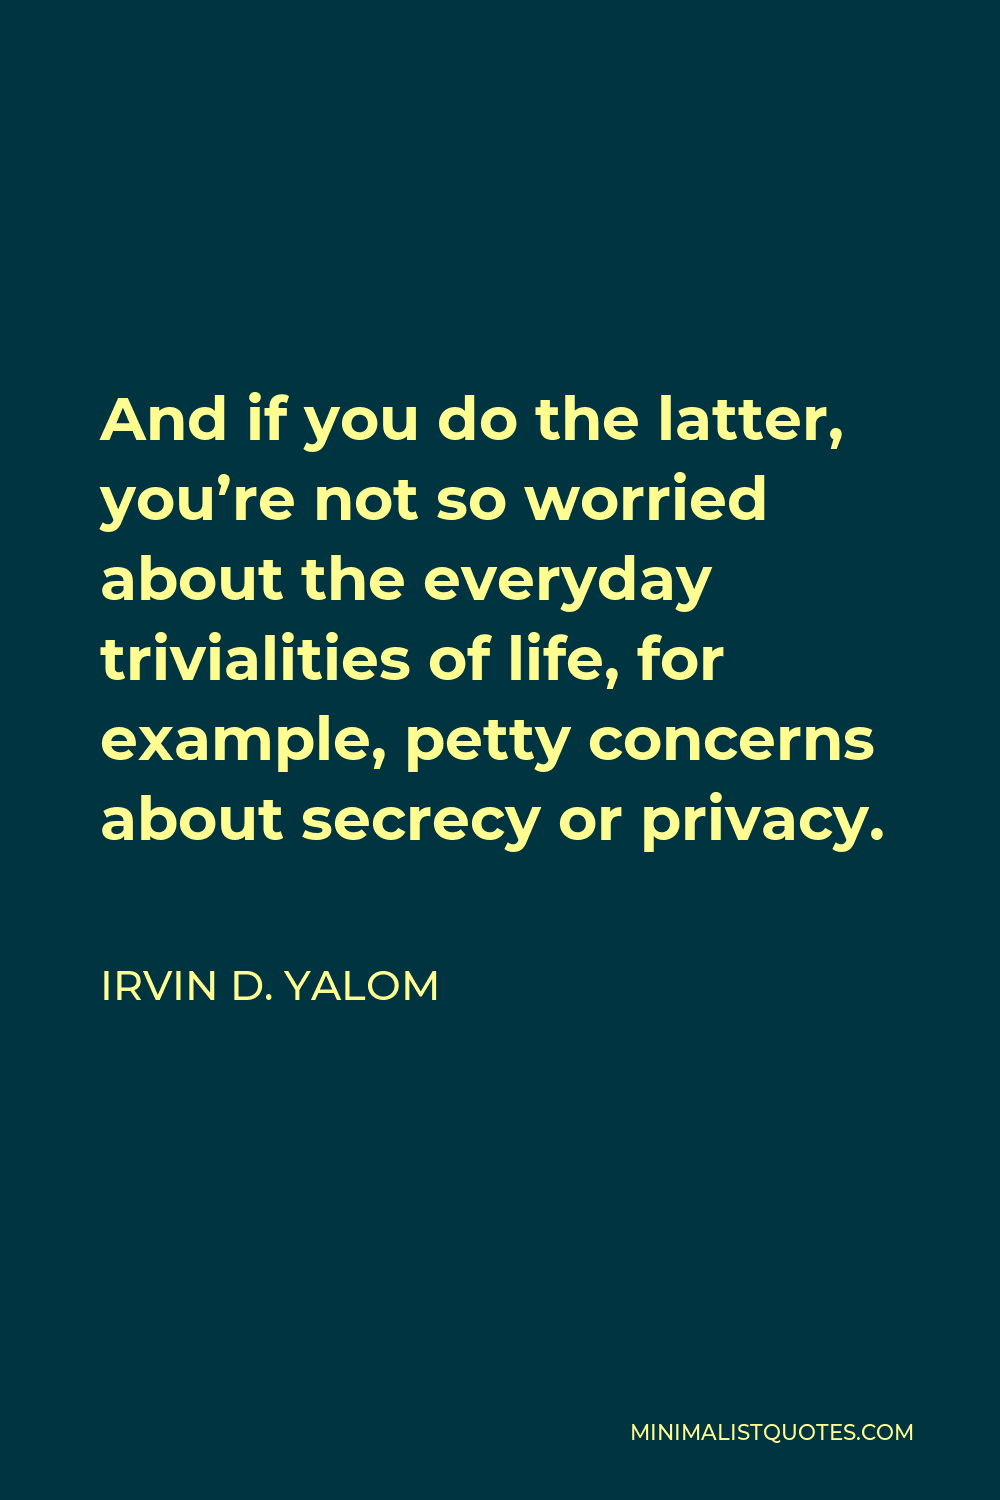 Irvin D. Yalom Quote - And if you do the latter, you’re not so worried about the everyday trivialities of life, for example, petty concerns about secrecy or privacy.